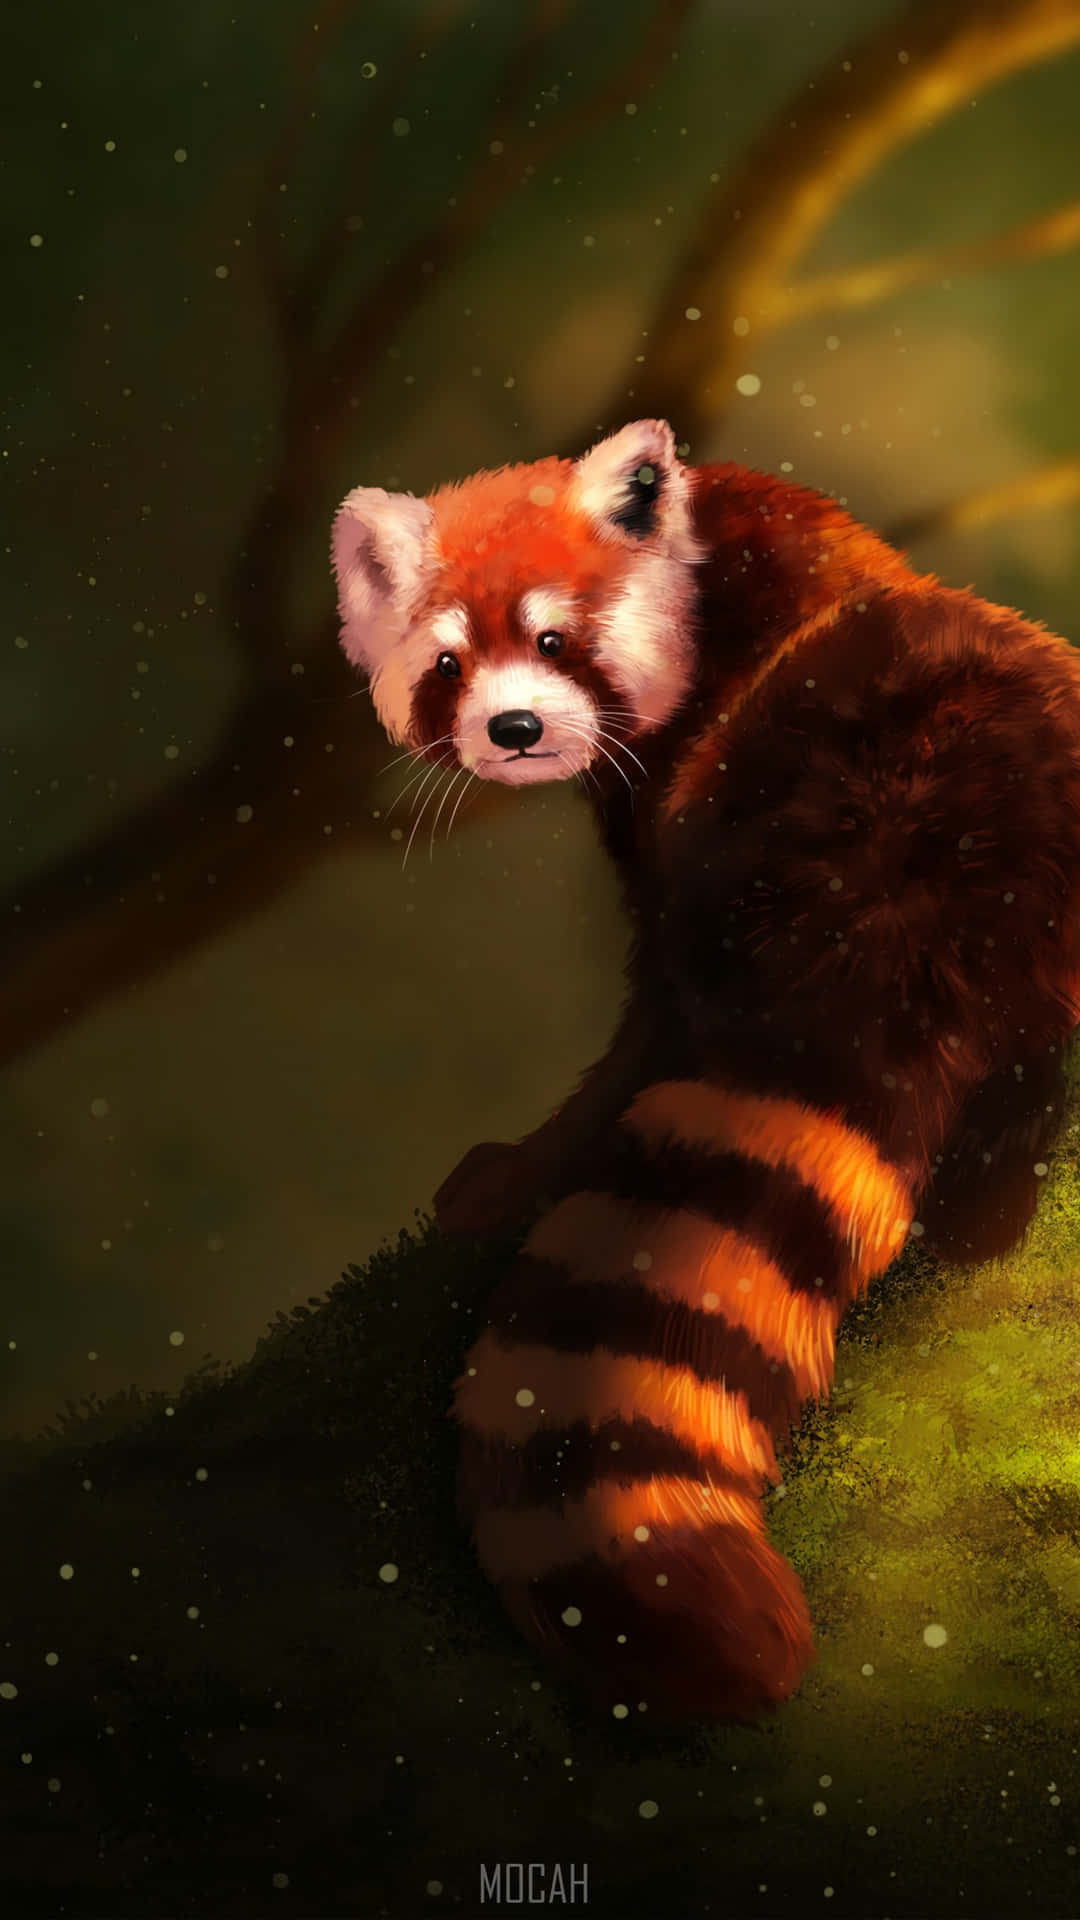 This Adorable Little Red Panda is Ready to Brighten Your Day Wallpaper